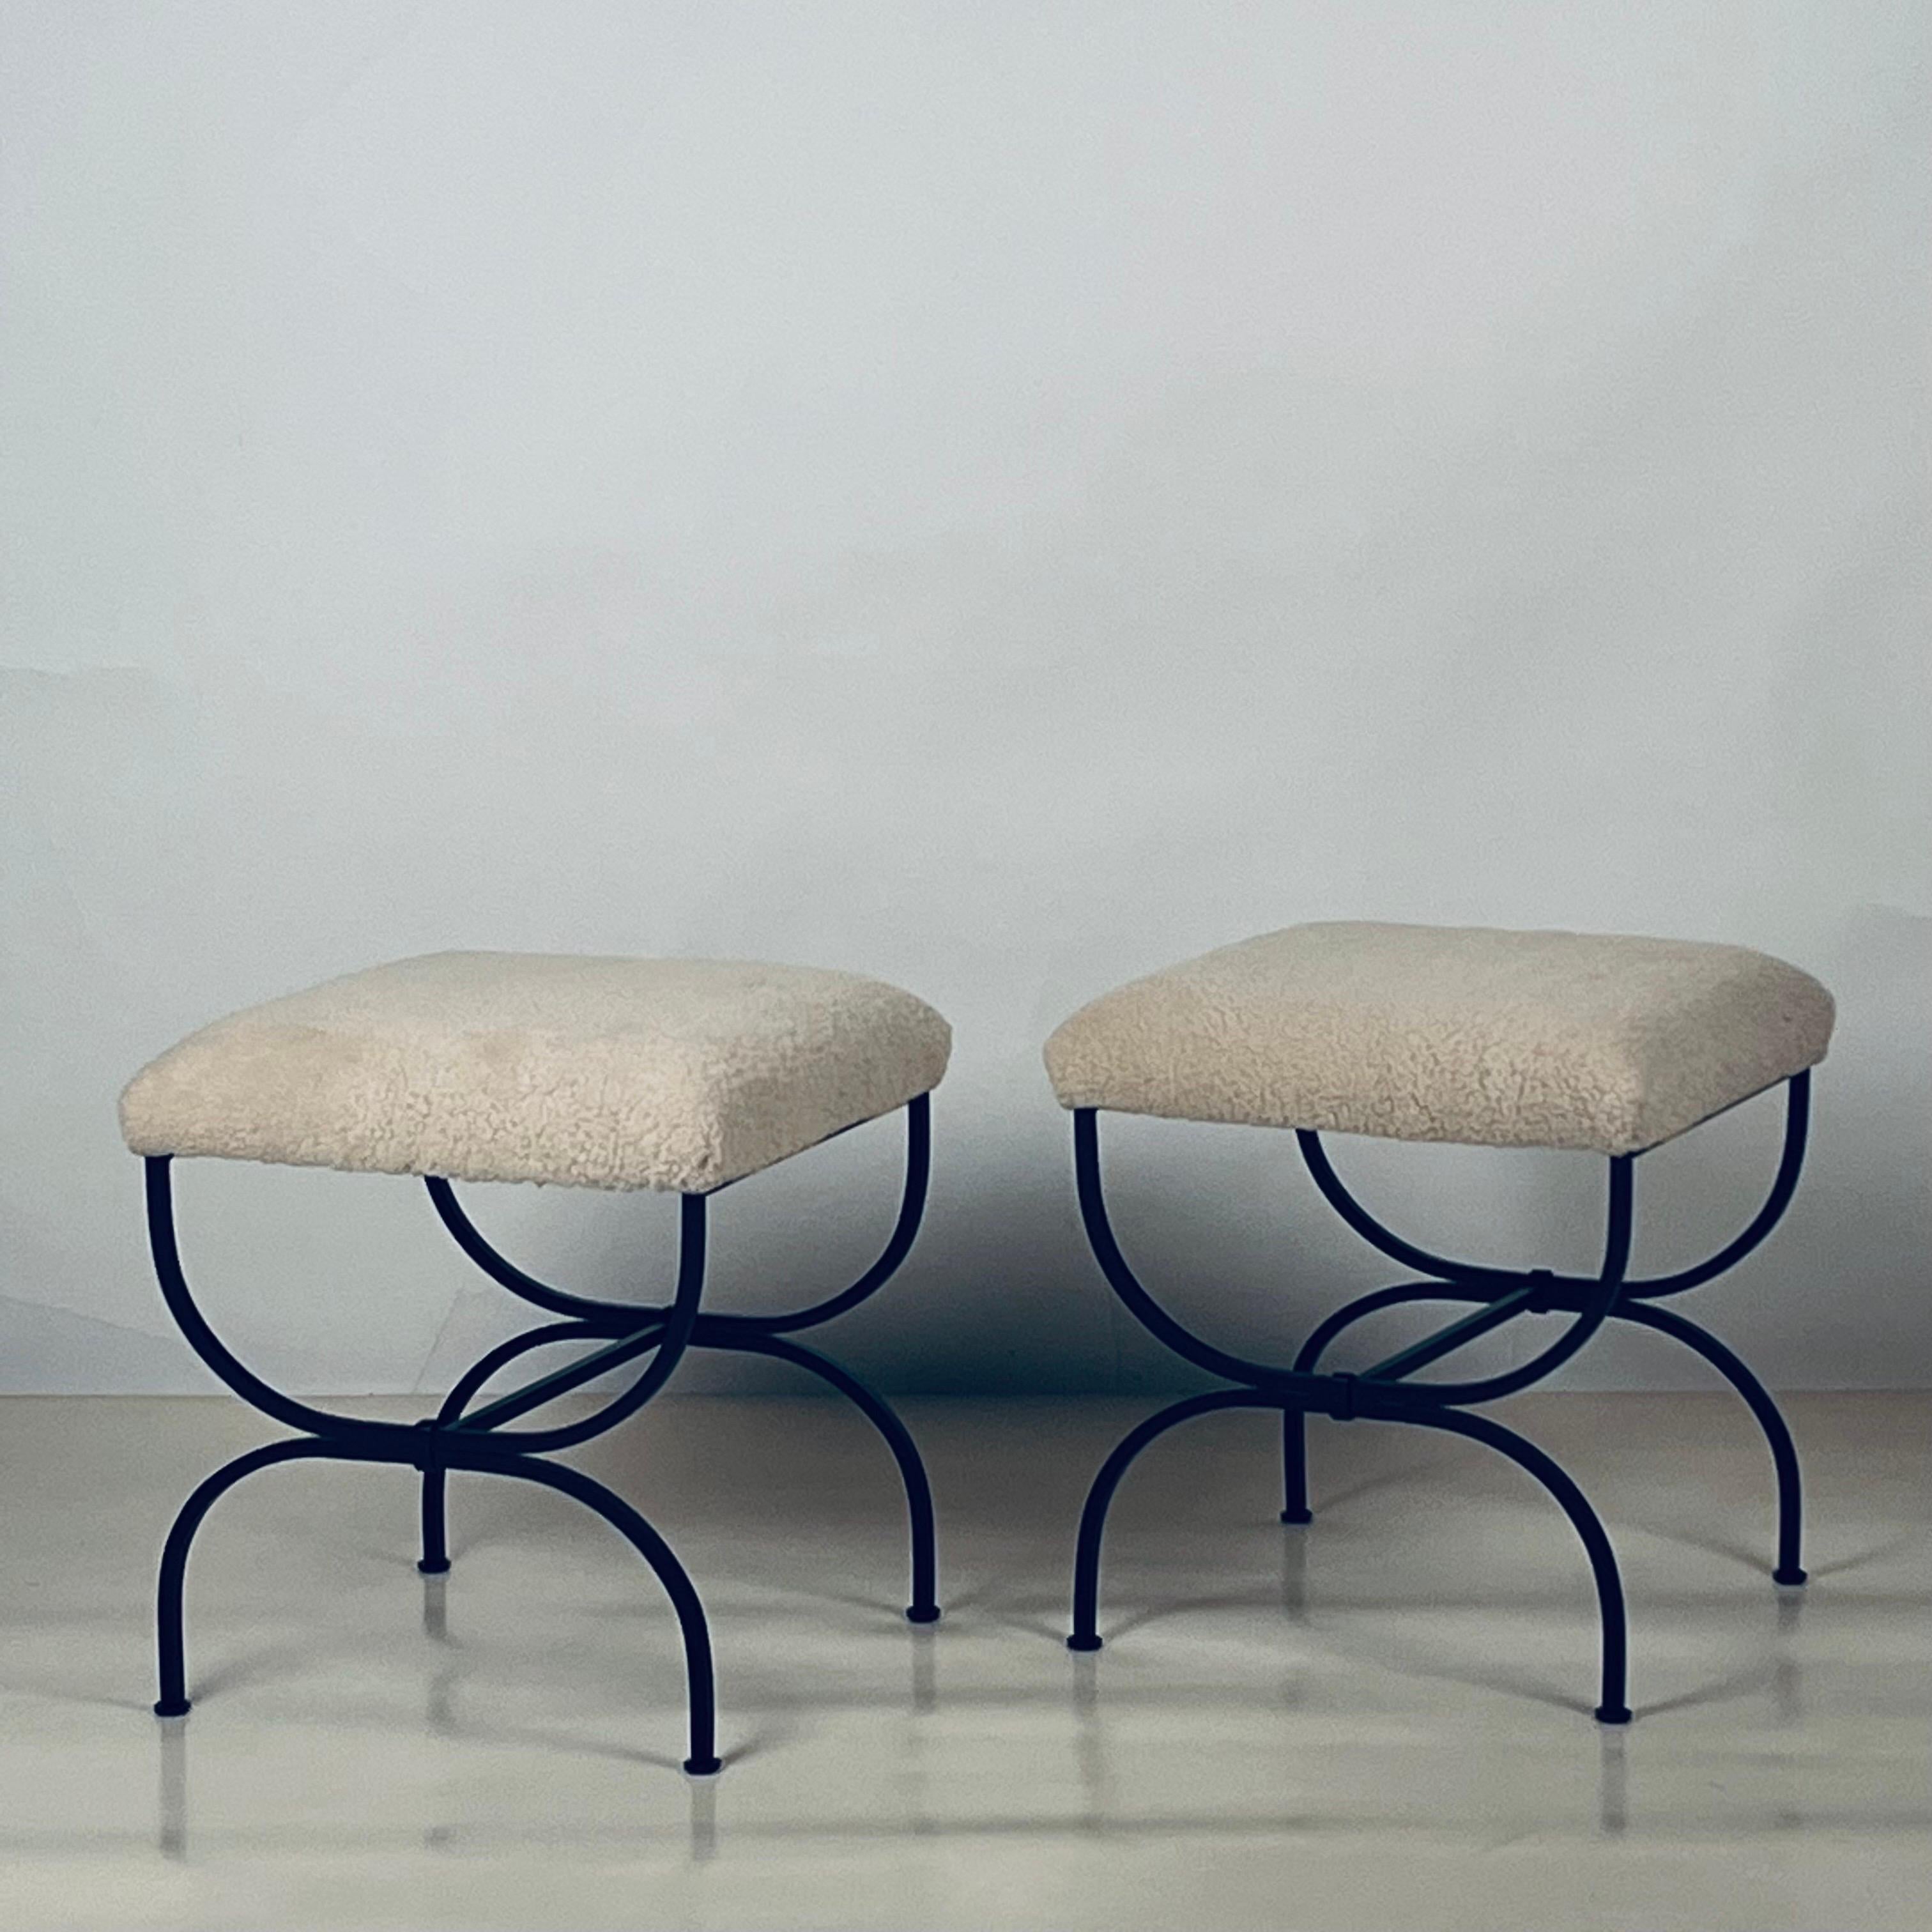 Pair of cream shearling 'Strapontin' stools by Design Frères.

Chic and understated.

Also great as a two-part bench.